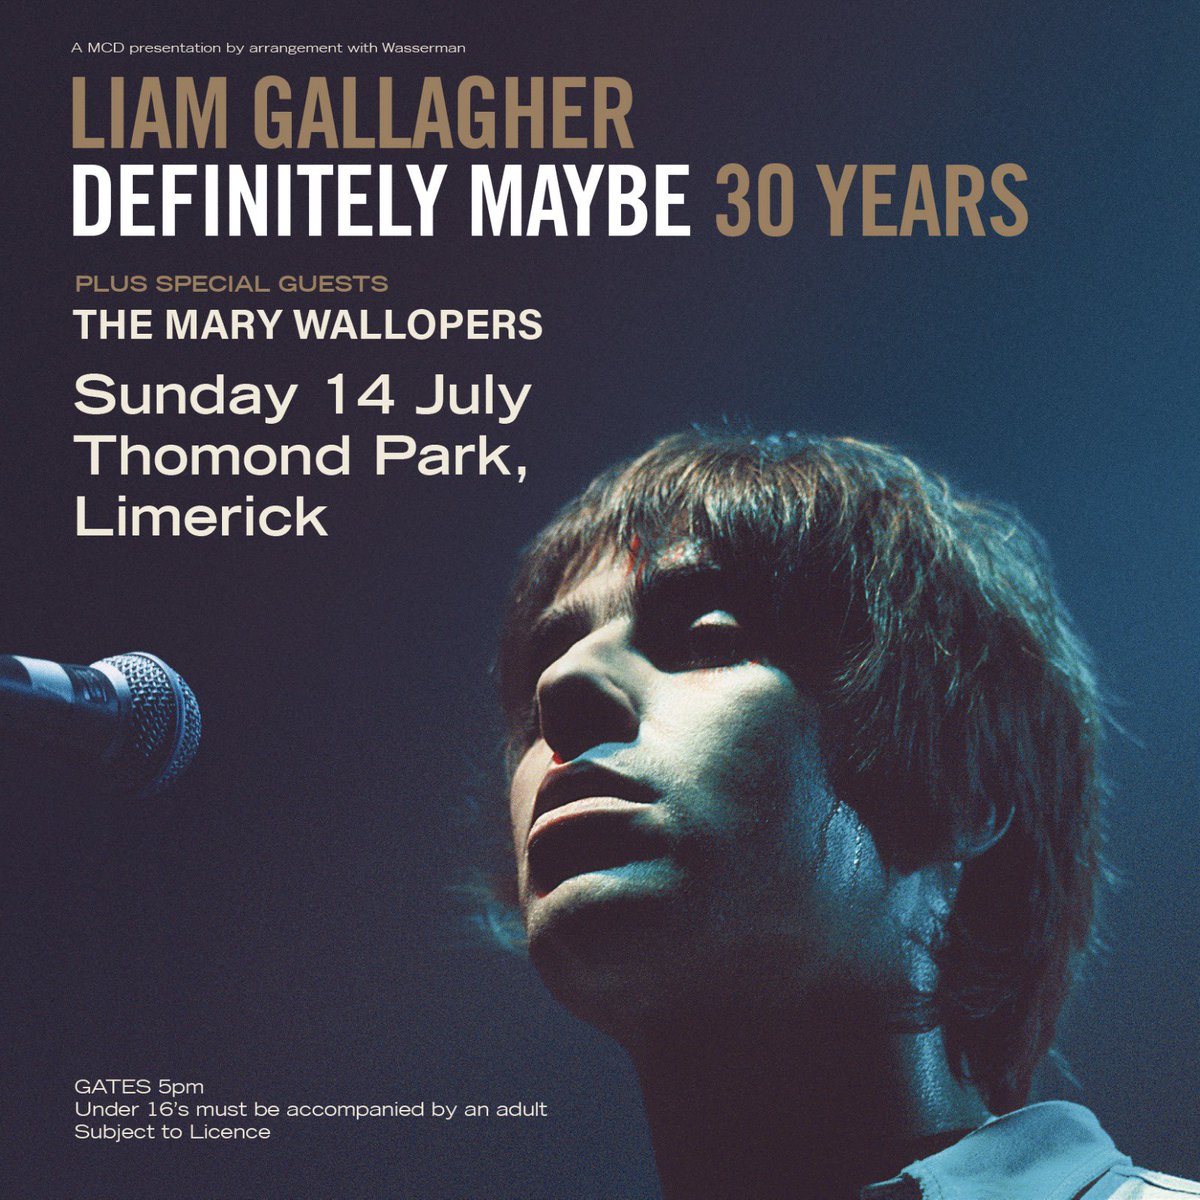 We’re excited to announce we’ll be supporting the mighty @liamgallagher this July in Limerick! Tickets are on sale now xoxo lnk.to/TMWLG